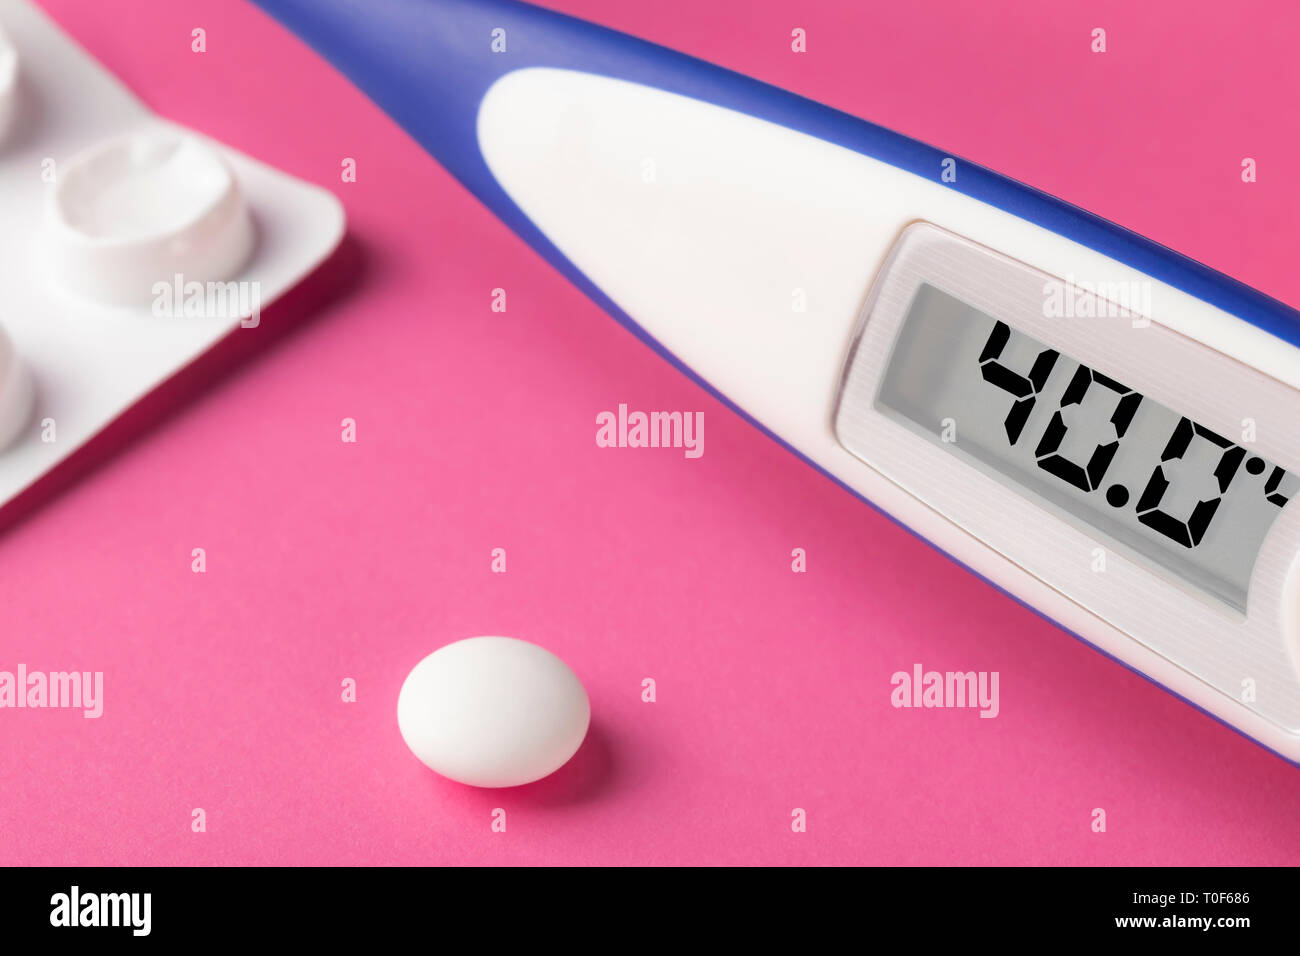 Electronic thermometer and pills on a pink background. High temperature 40 degrees Celsius on display. Copy space. Stock Photo